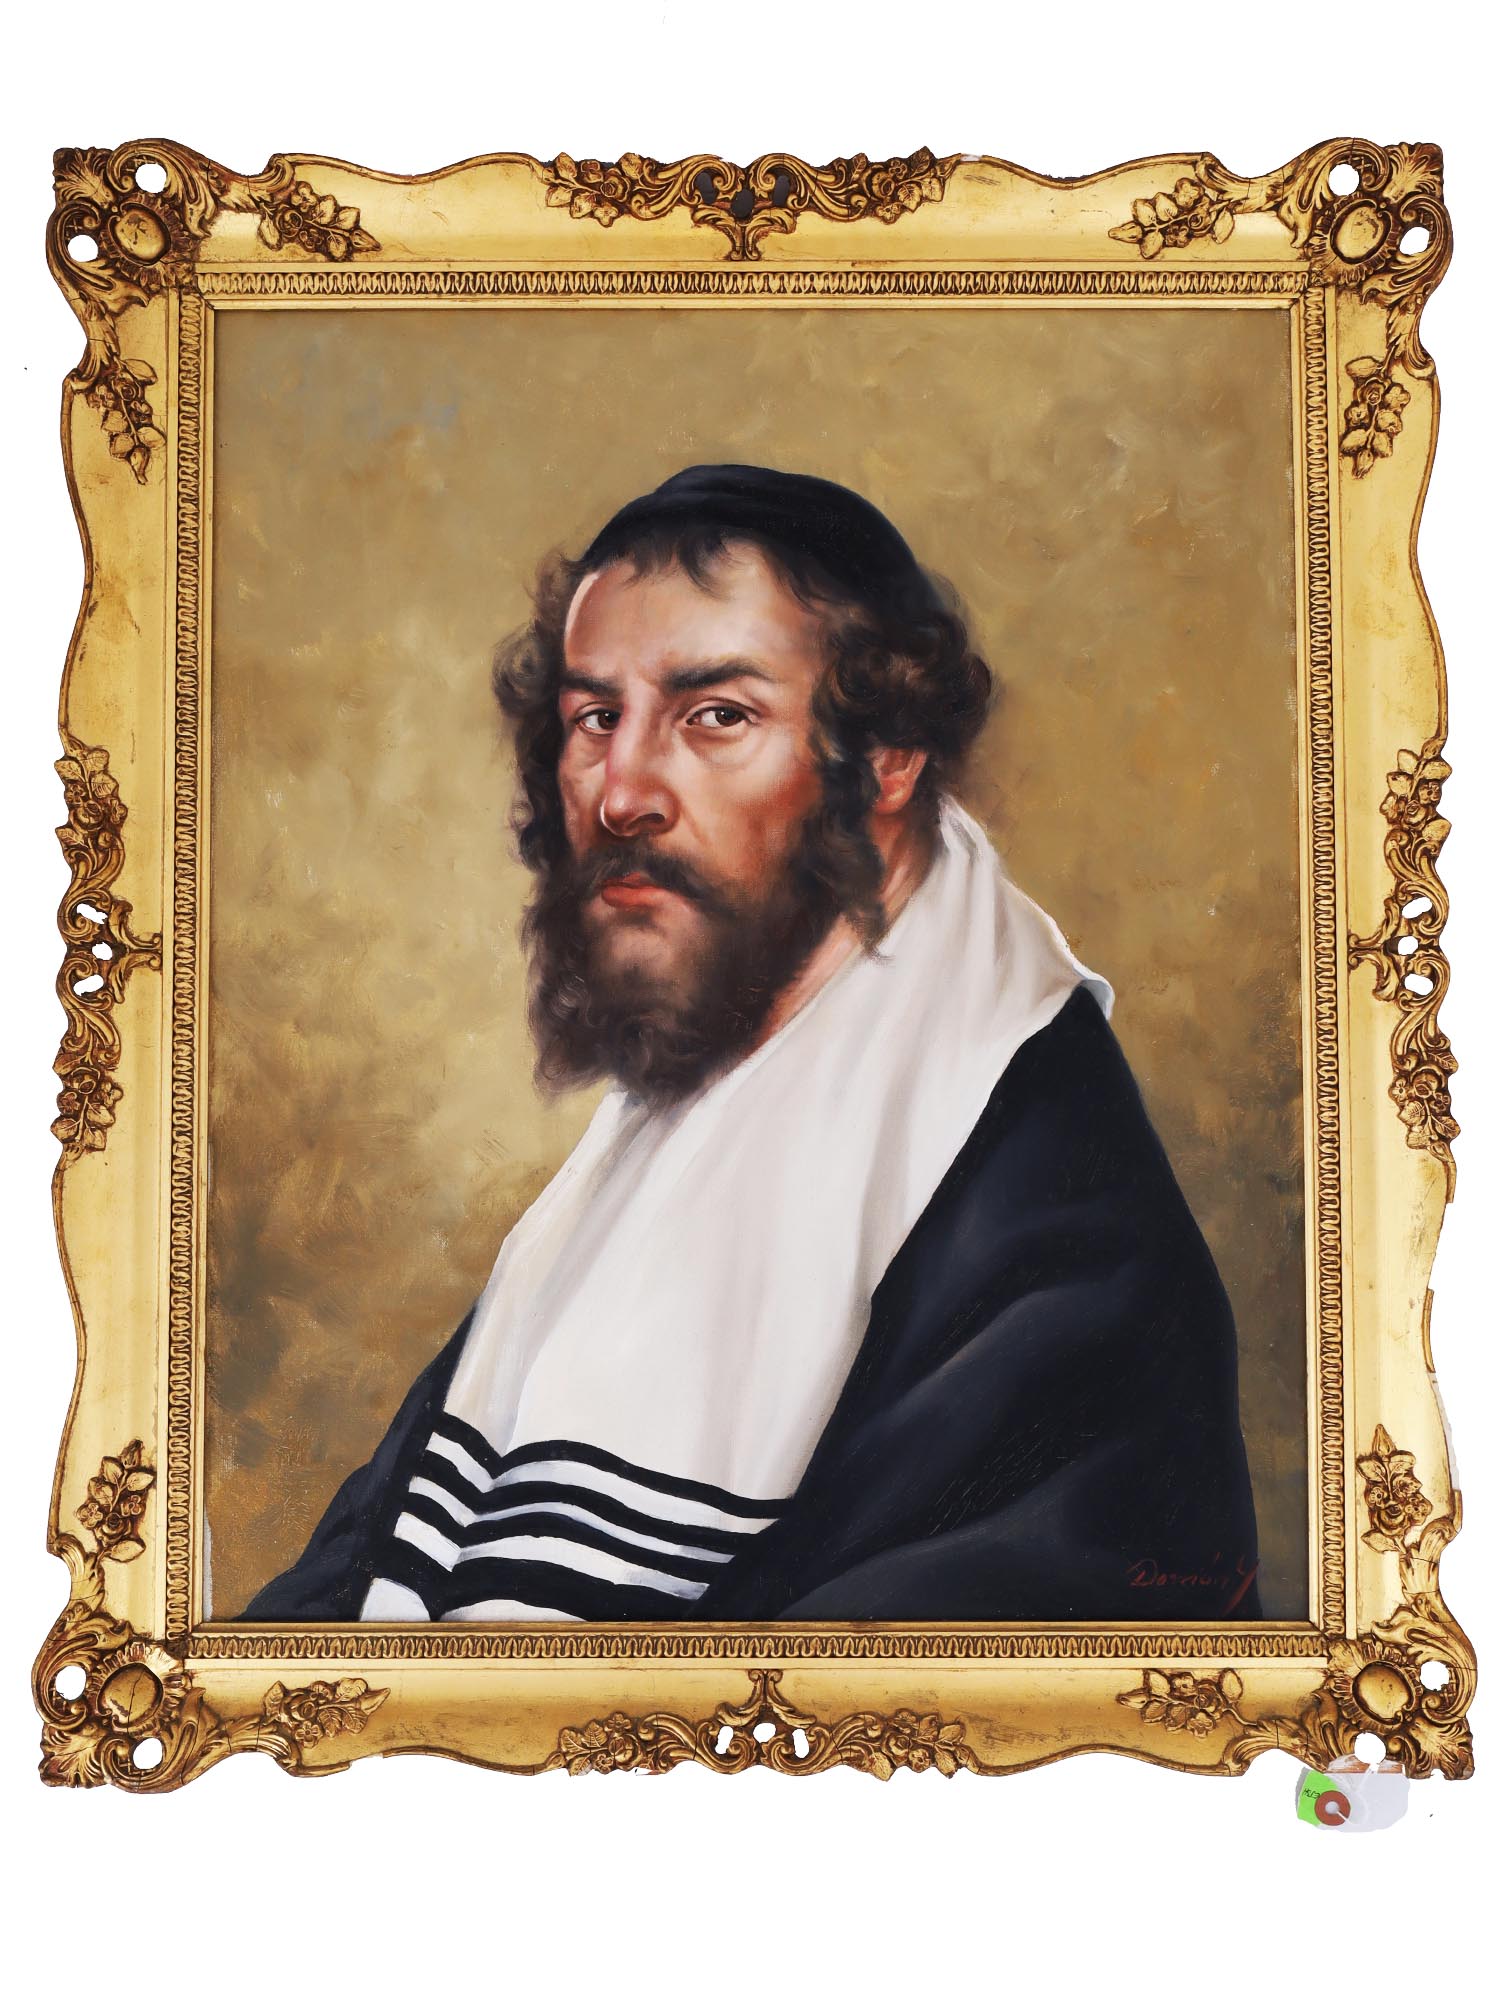 FRAMED OIL PAINTING PORTRAIT OF RABBI BY DOMAN F